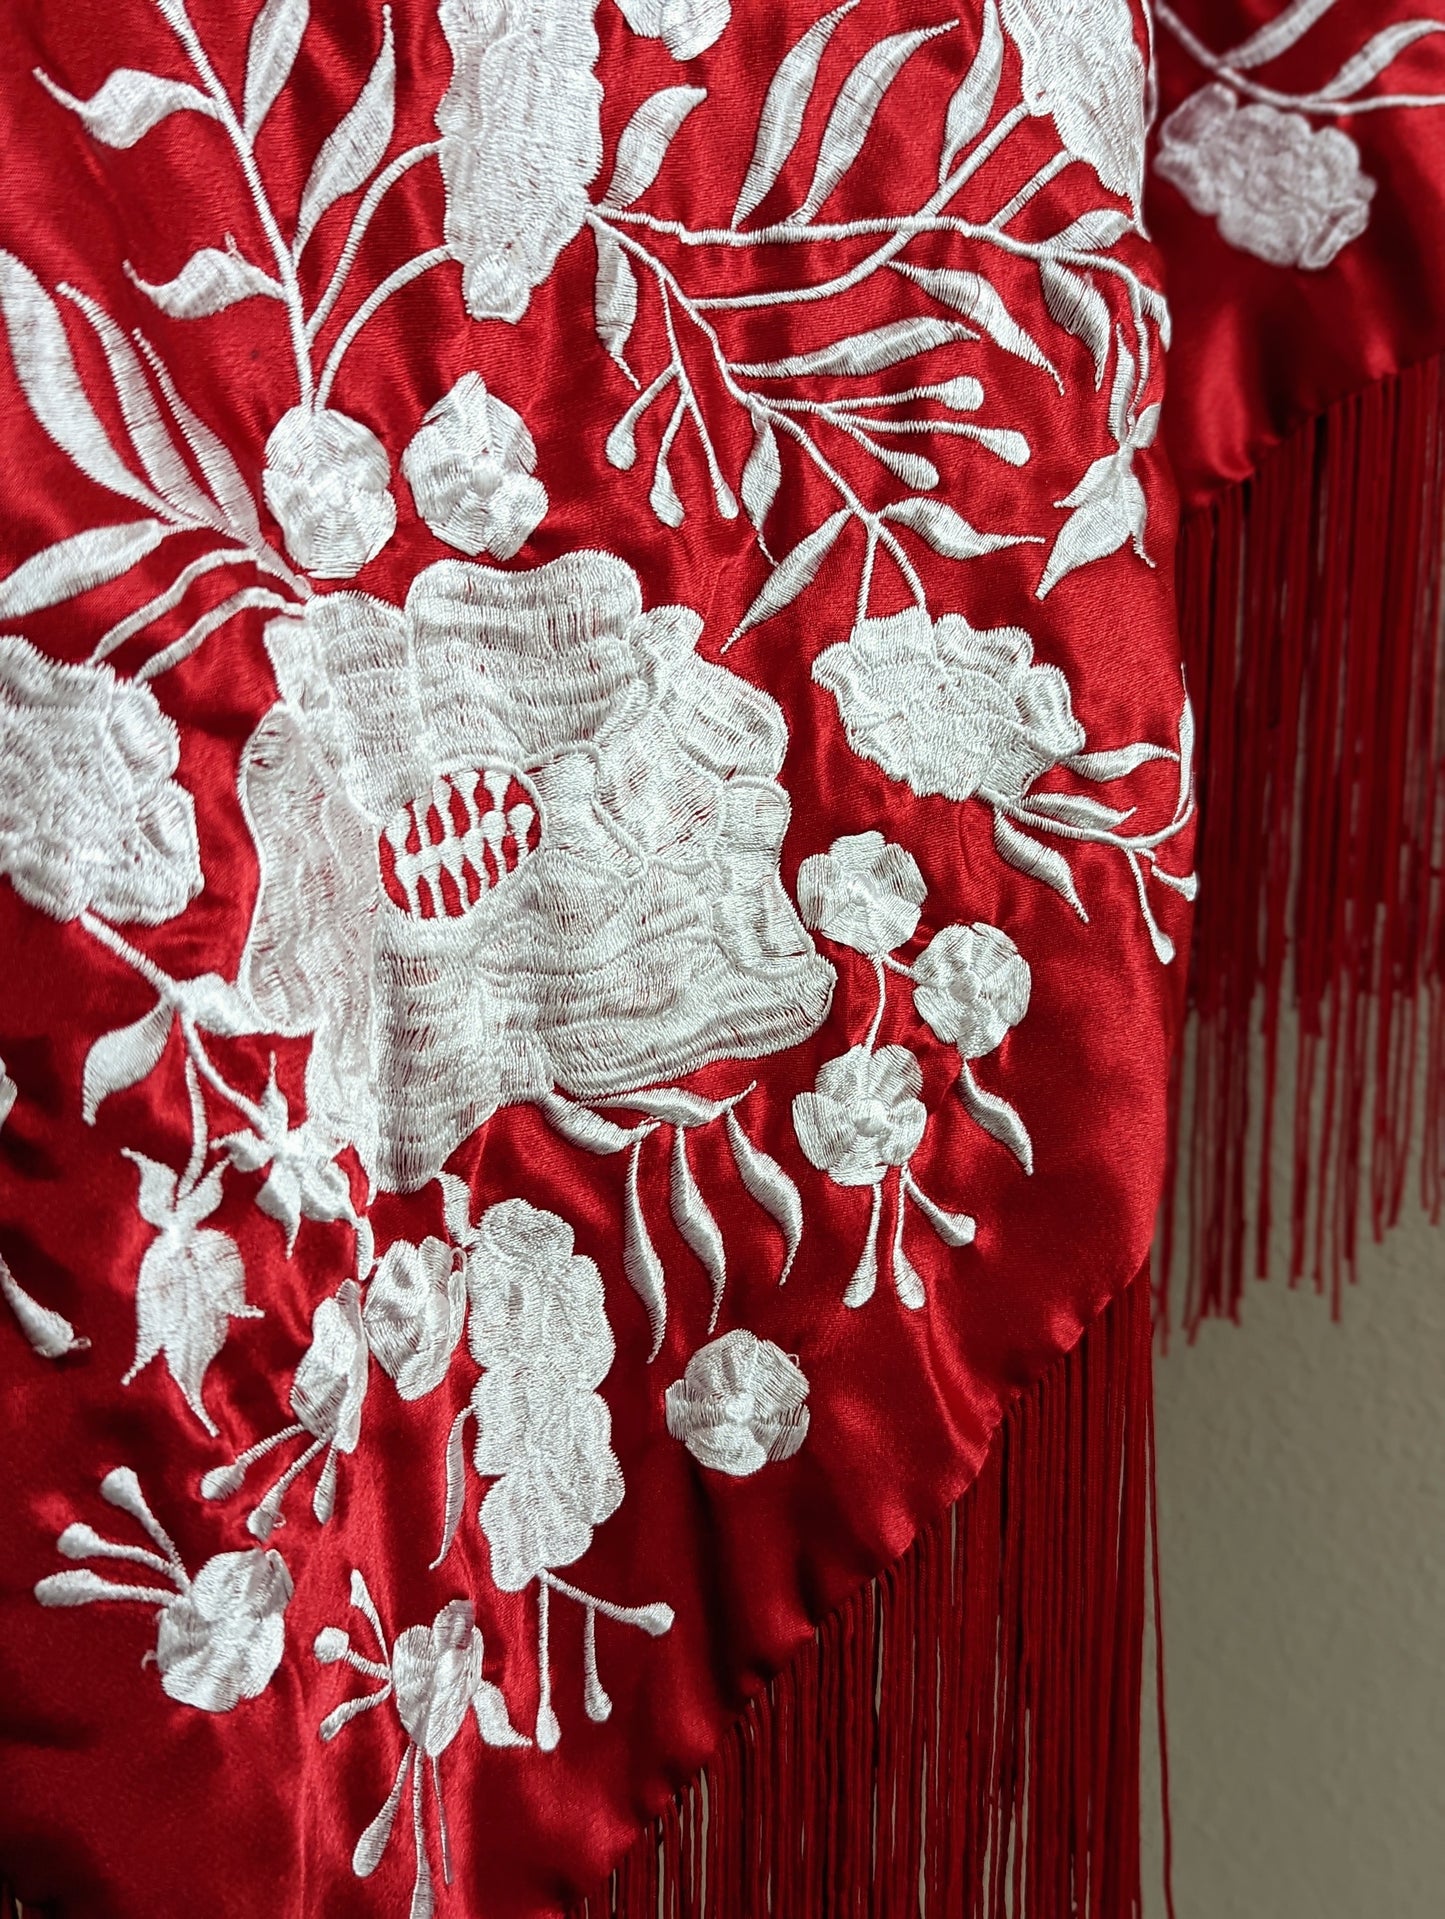 Vintage Silk Charmeuse Piano Shawl in Red With White Floral Silk Hand Embroidery, Finished with a Hand Knotted Fringe